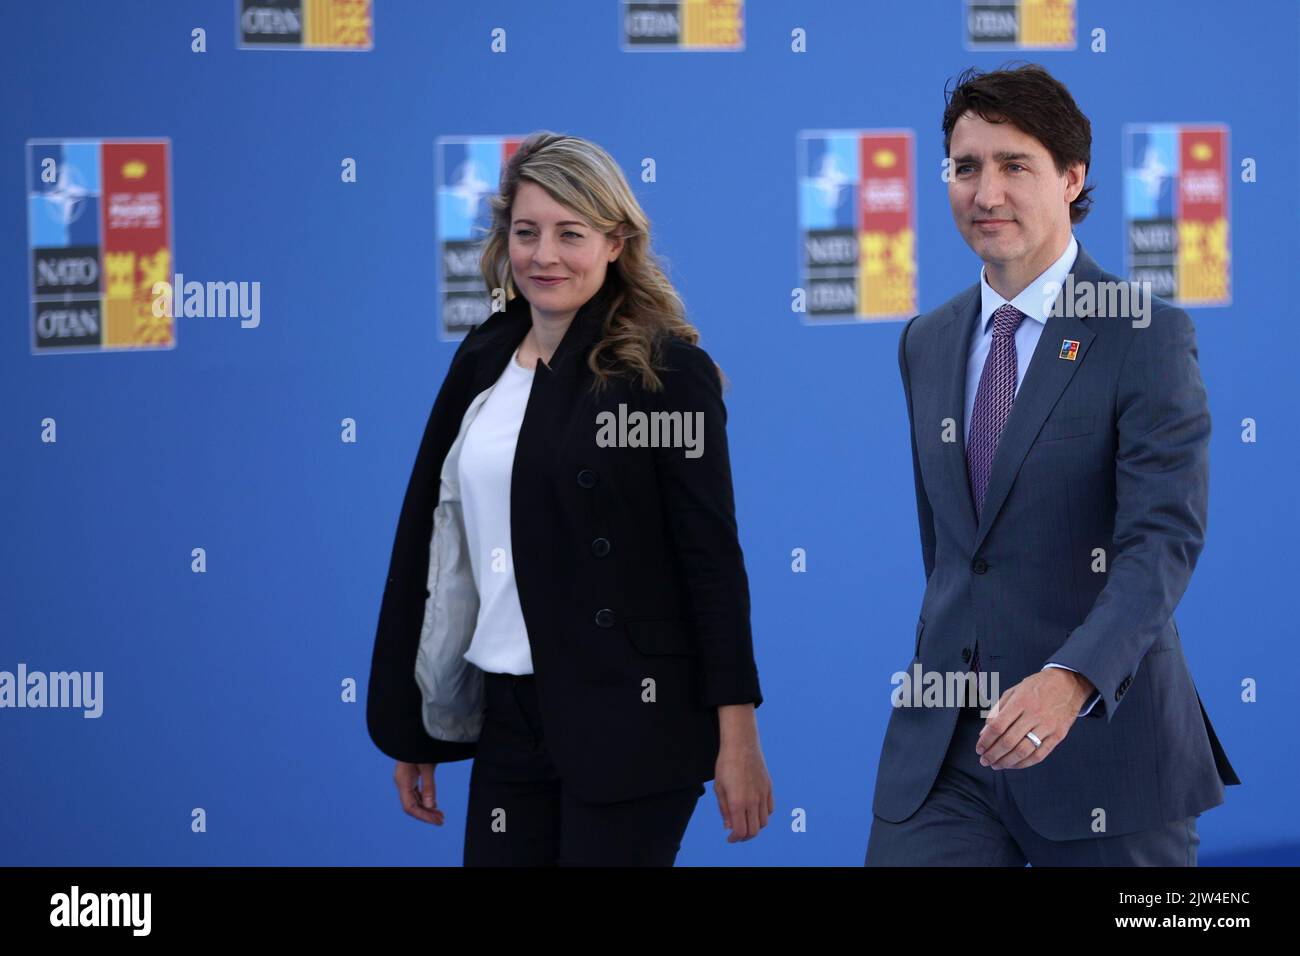 Spain, Madrid - 30 June, 2022: Canada's Prime Minister Justin Trudeau (R) and Foreign Minister Melanie Joly attend the NATO summit in Madrid, Spain. Stock Photo